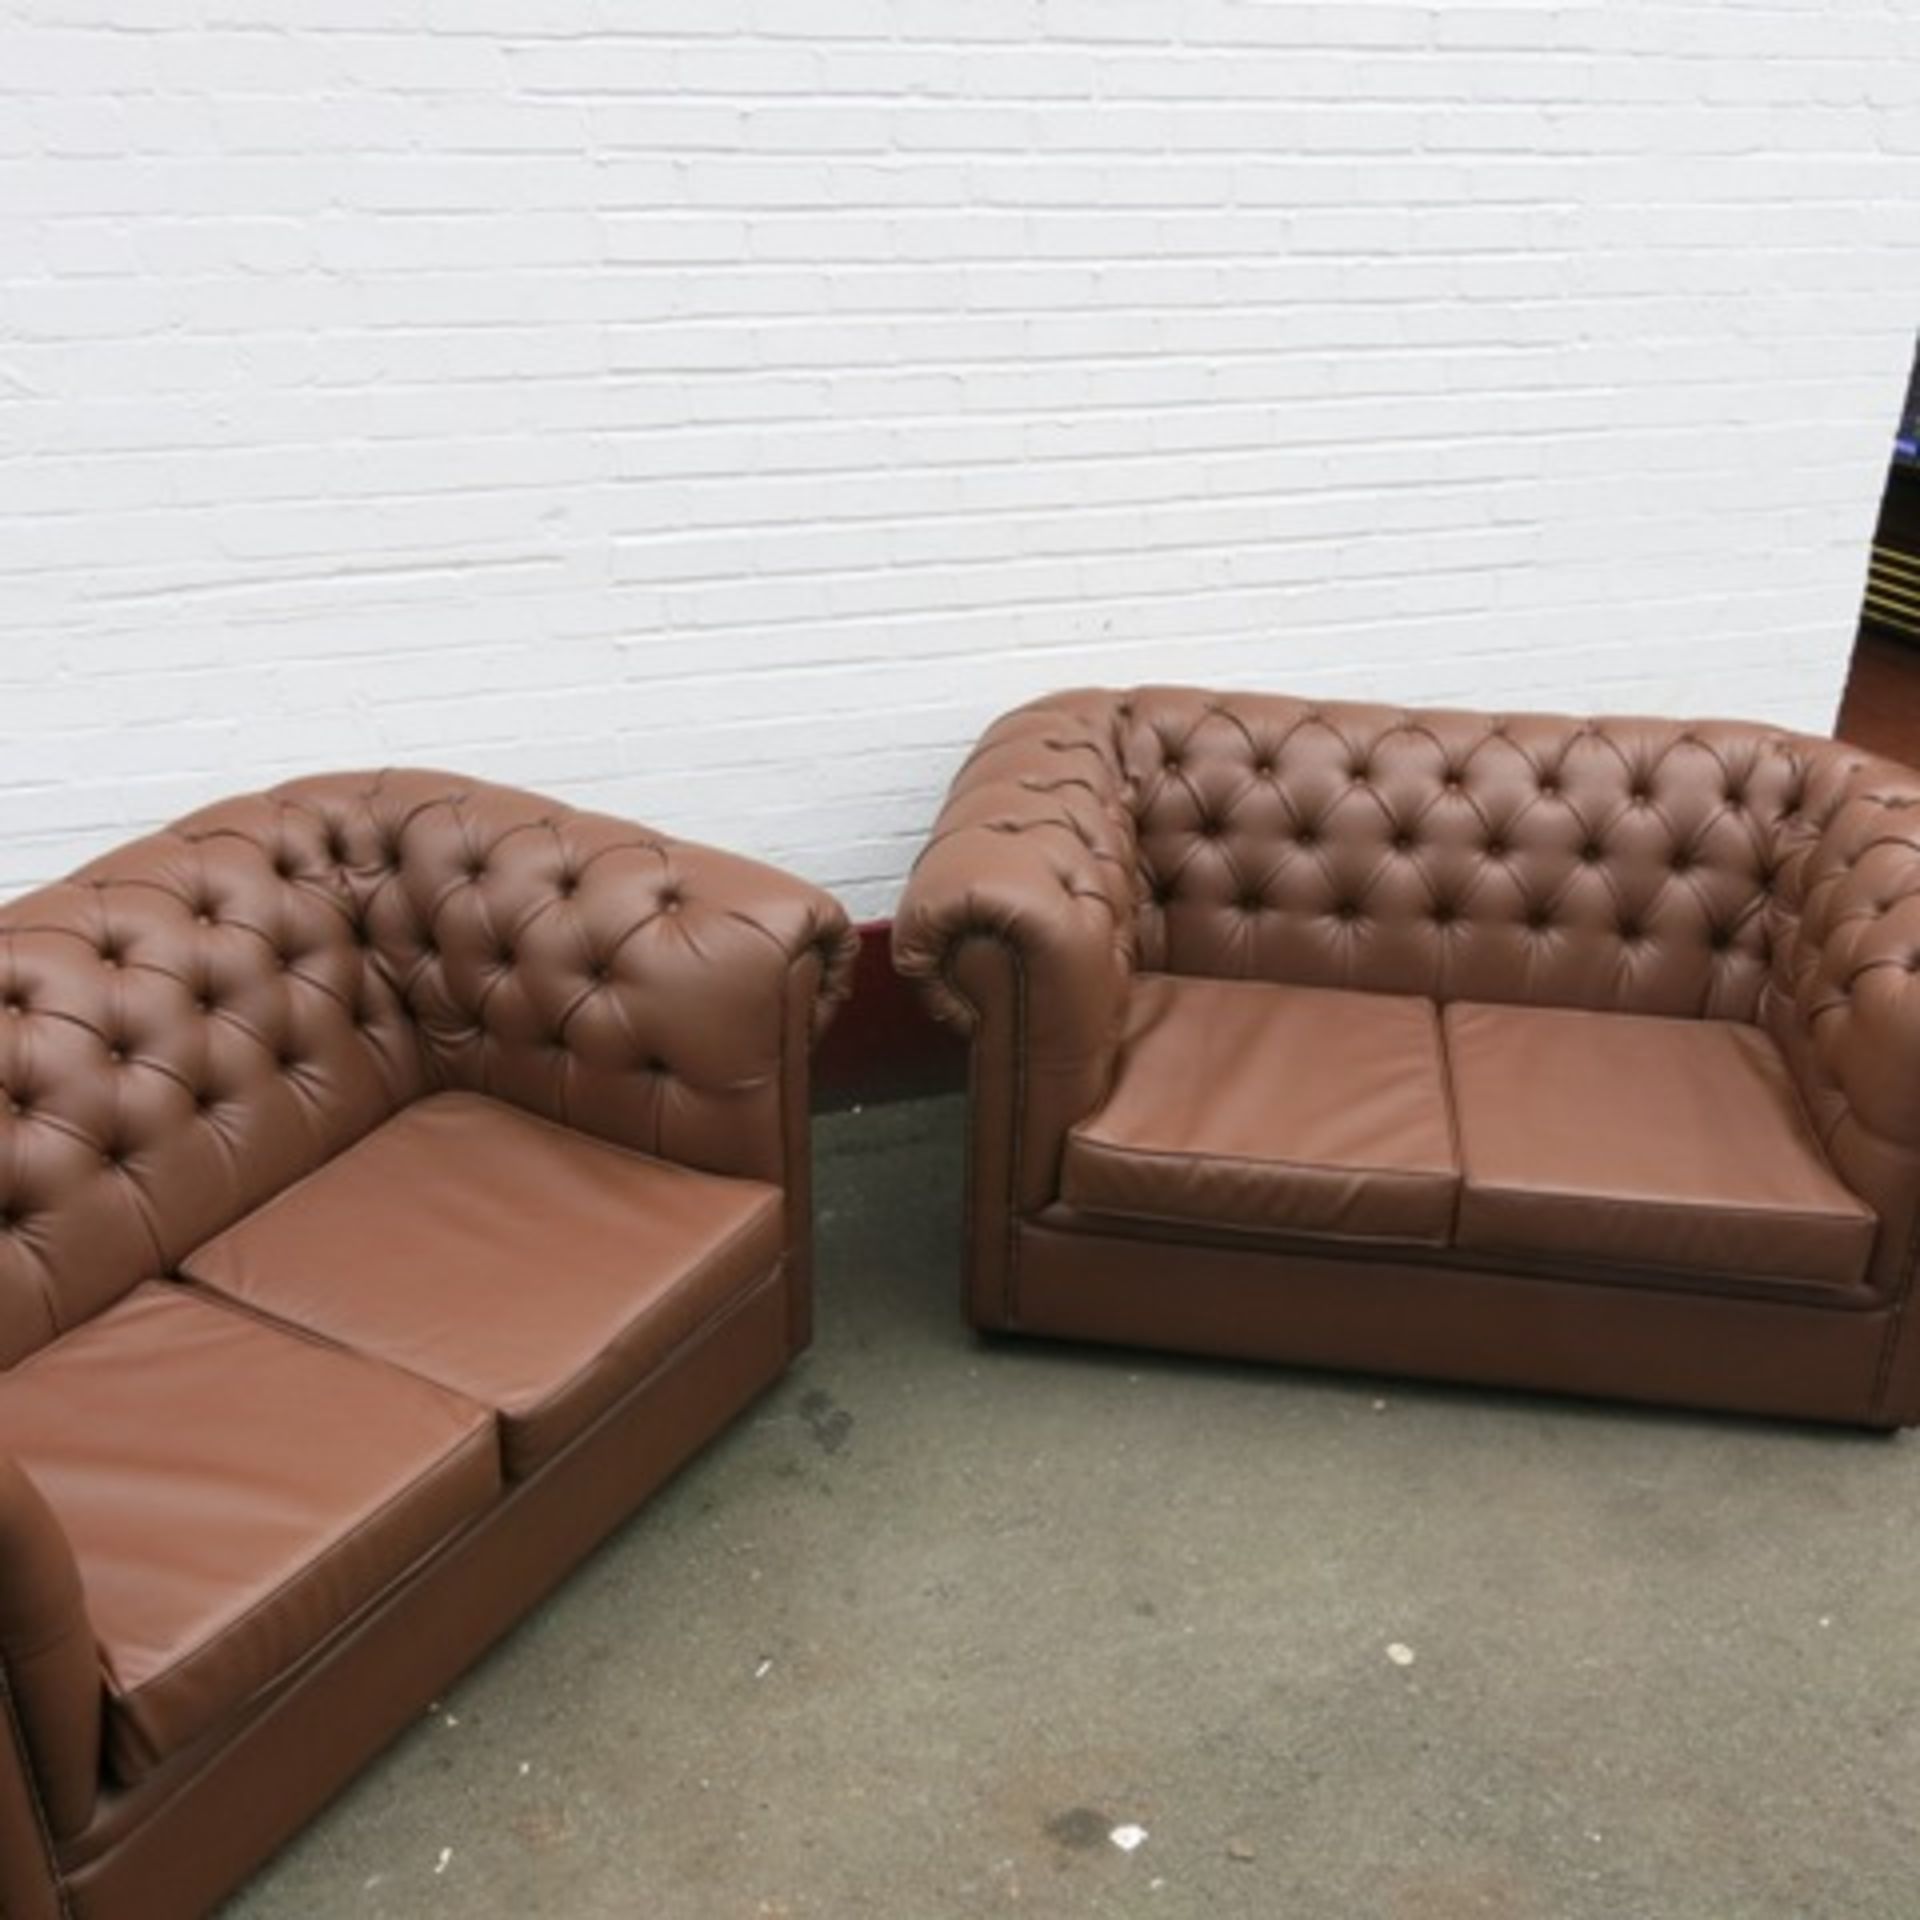 2 x Warings Furniture Chesterfield Style 2 Seater Sofas in Brown Faux Leather, Size (H)80cm x (D) - Image 6 of 6